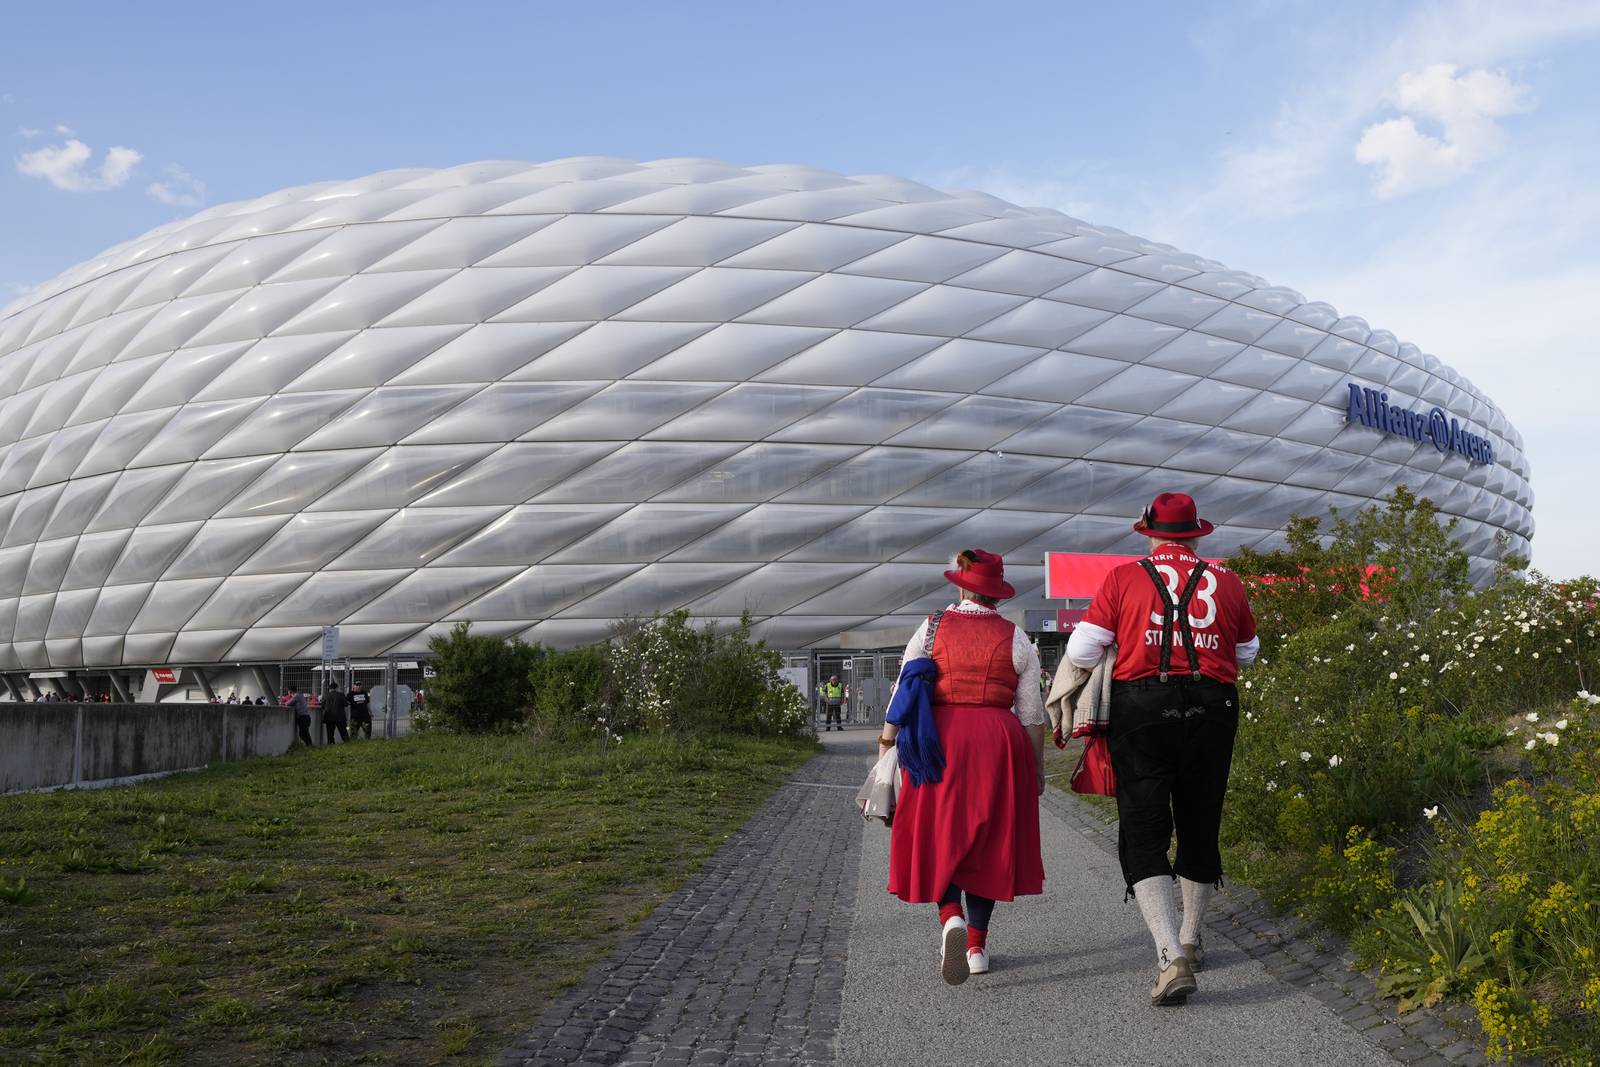 Euro 2024 in Germany is UEFA's 1st step to raise pandemichit cash